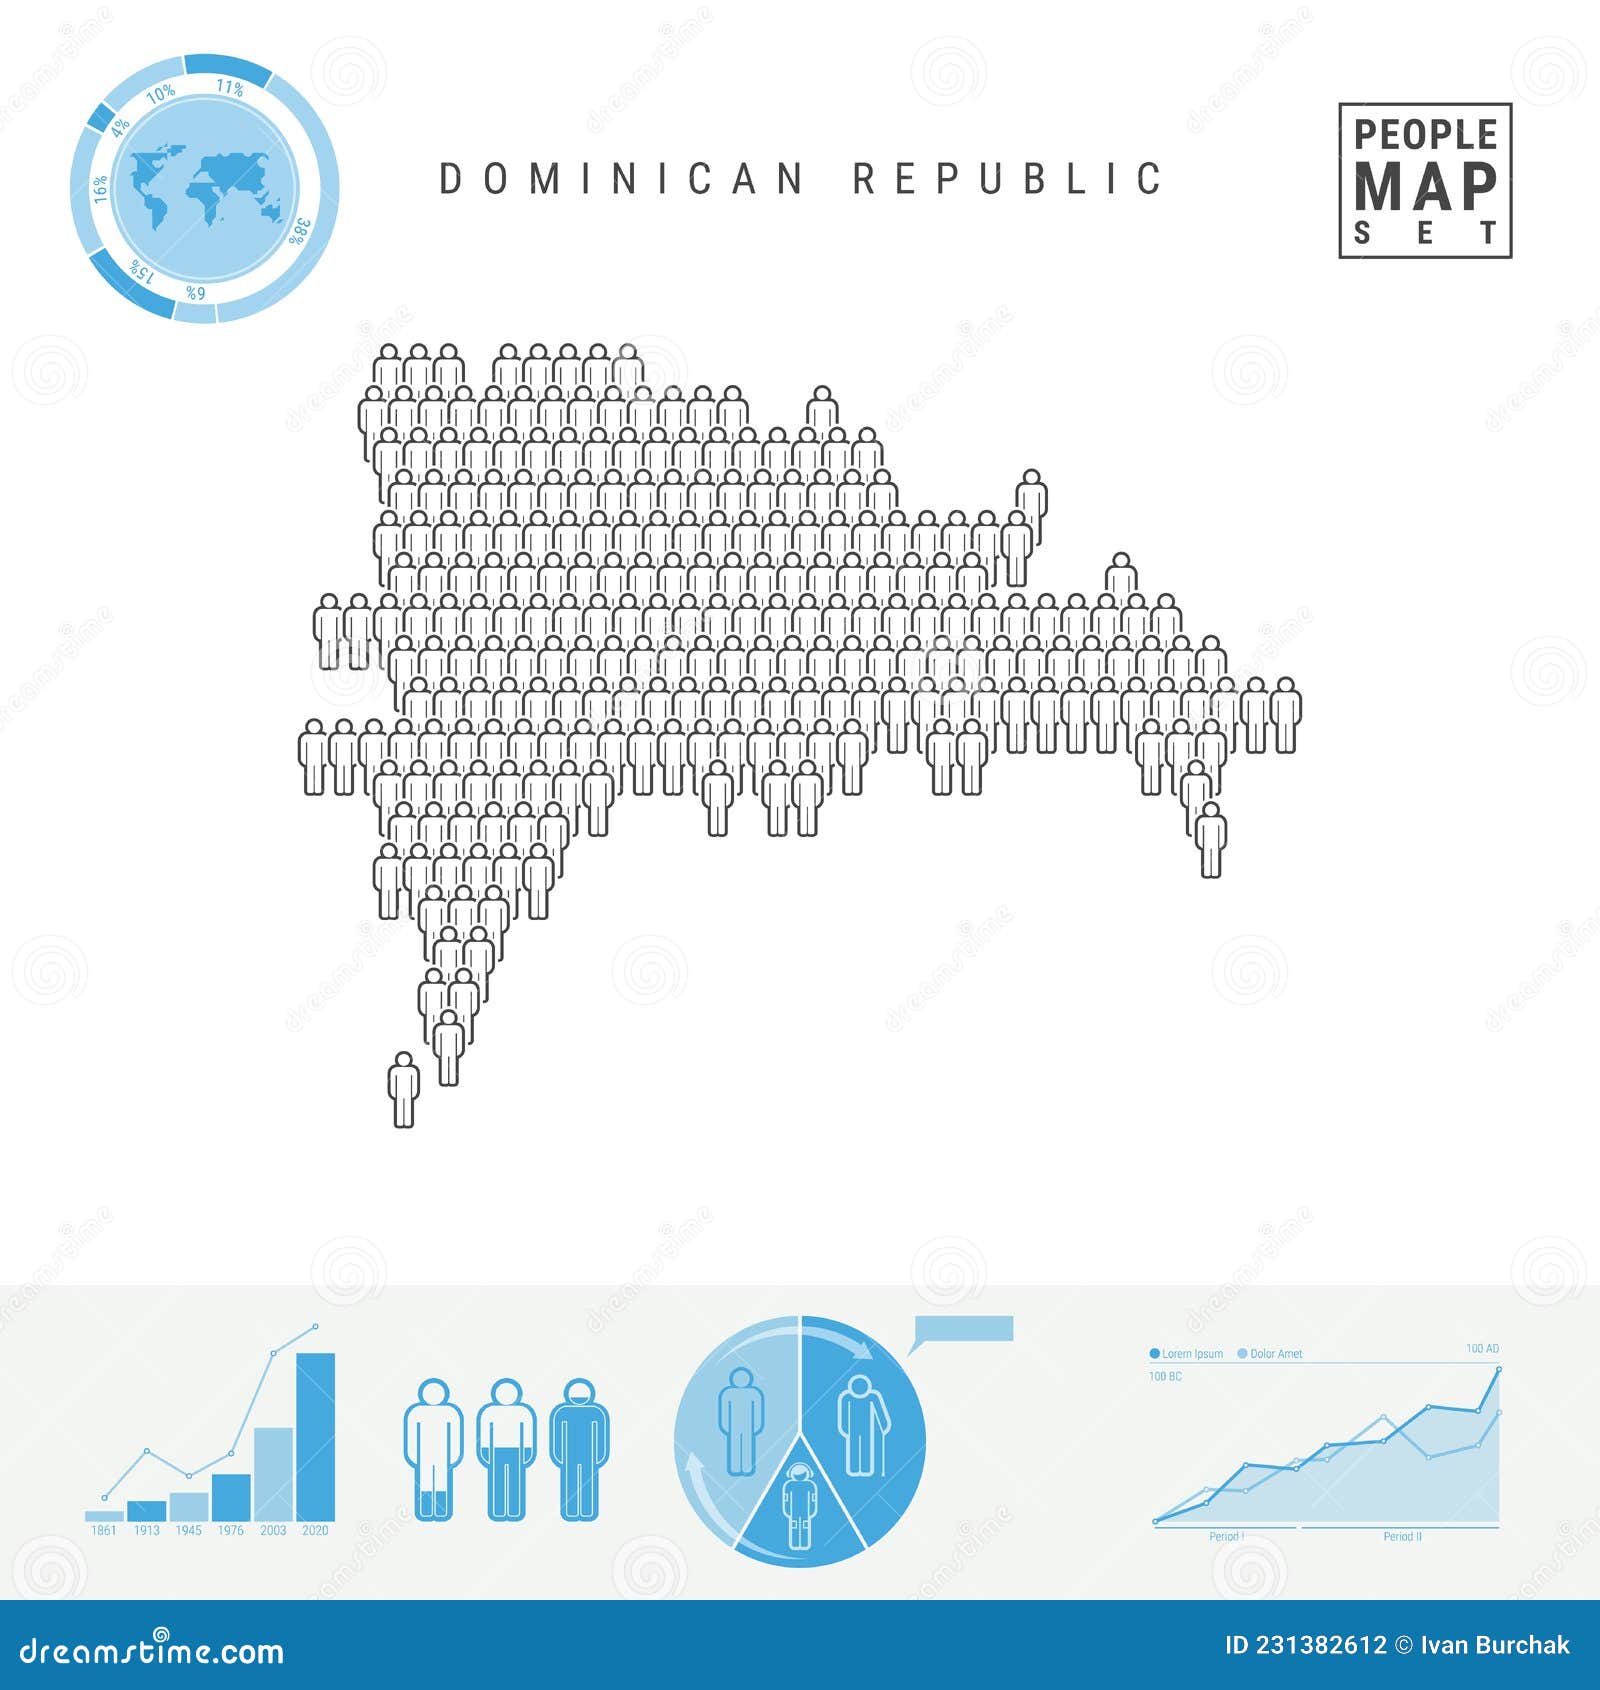 Dominican Republic People Icon Map. Stylized Vector Silhouette